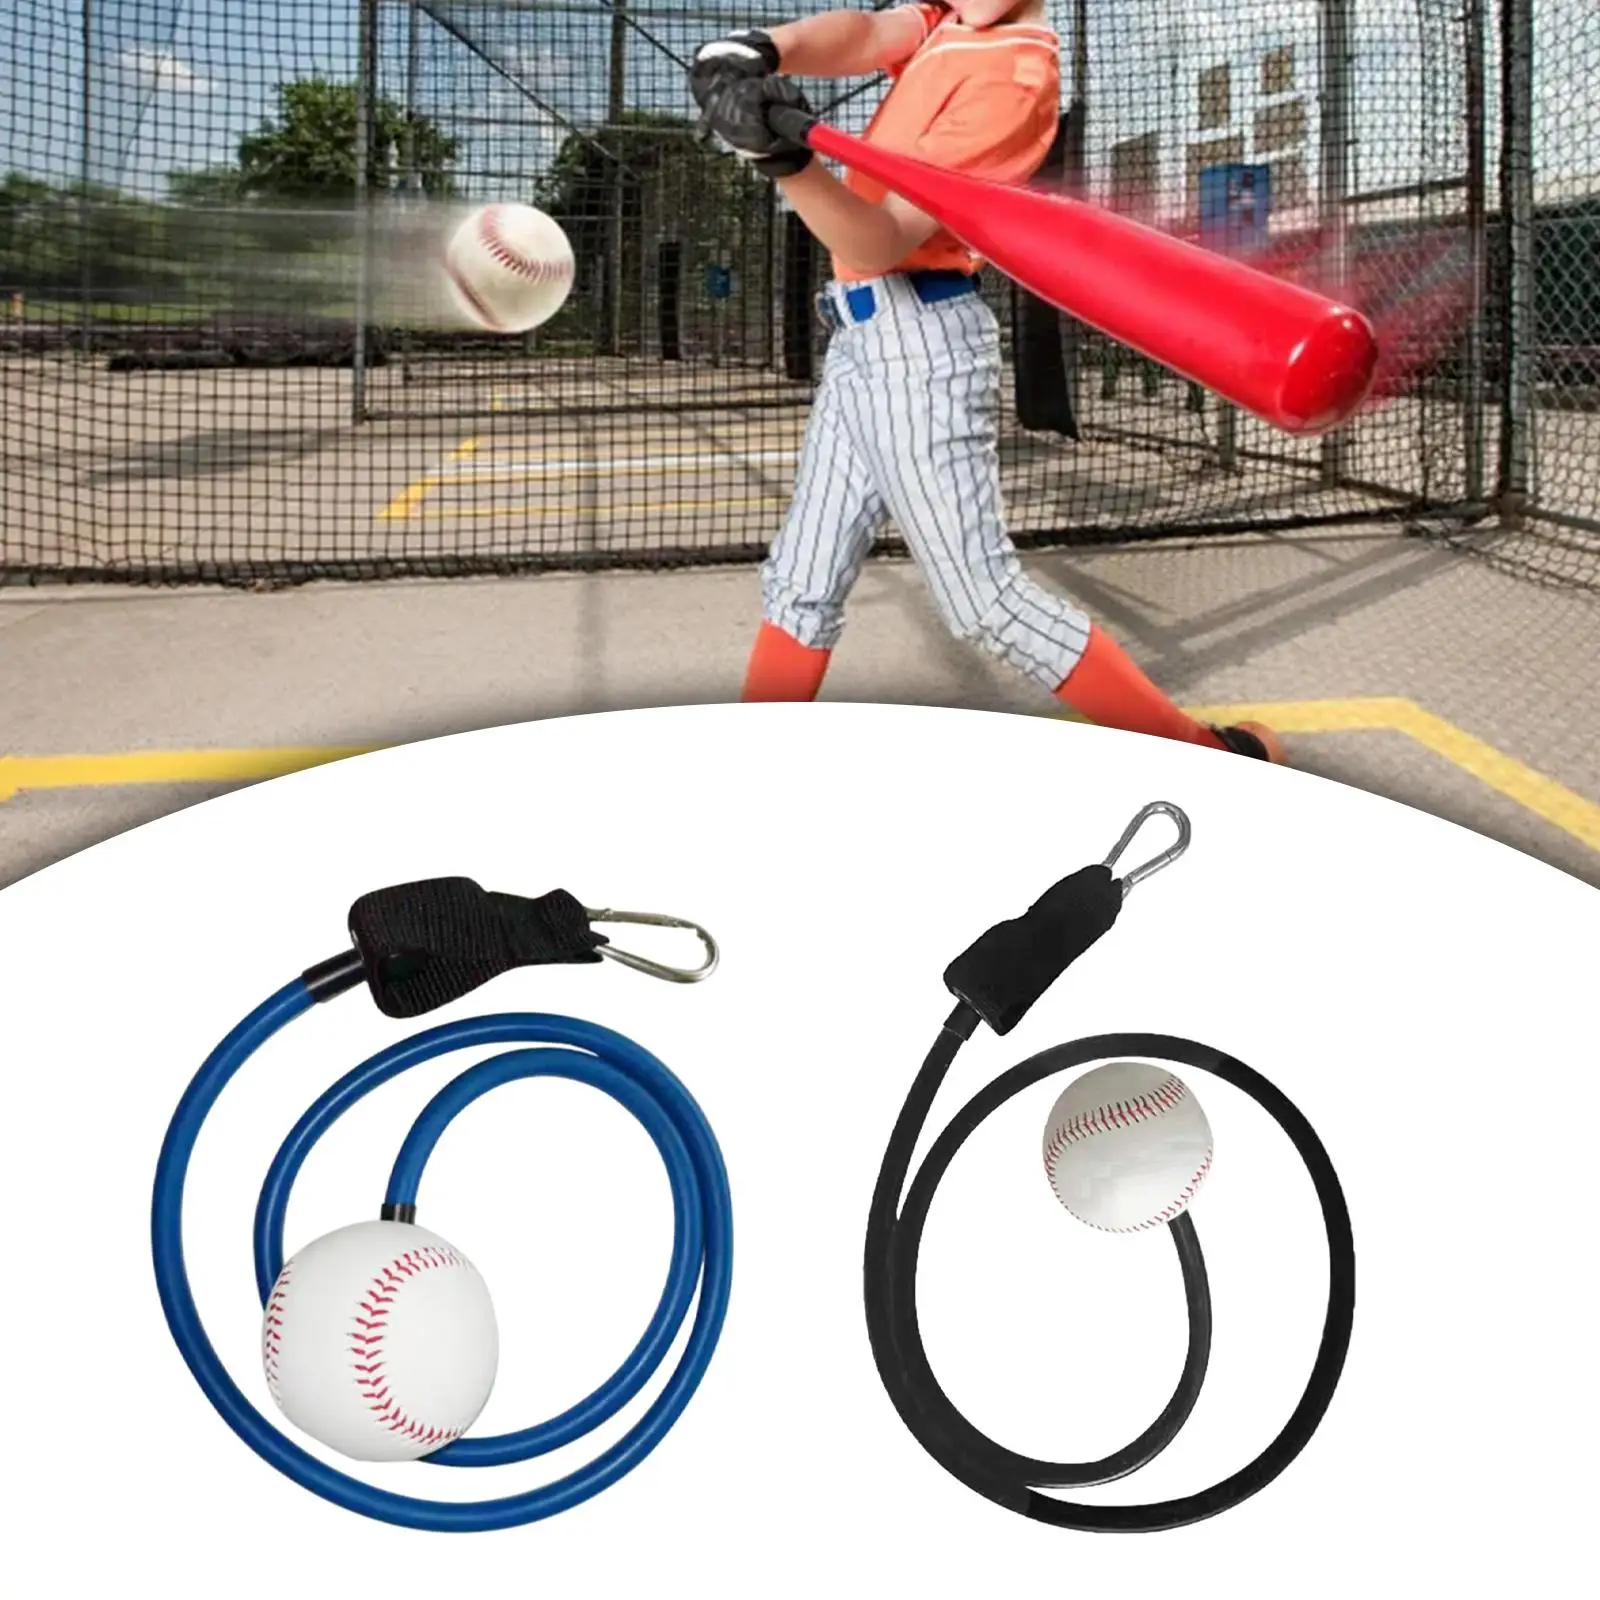 Baseball Pitching Bands Resistance Bands Fitness Equipment Elastic Band Baseball Training Bands for Beginners Stretch Arm